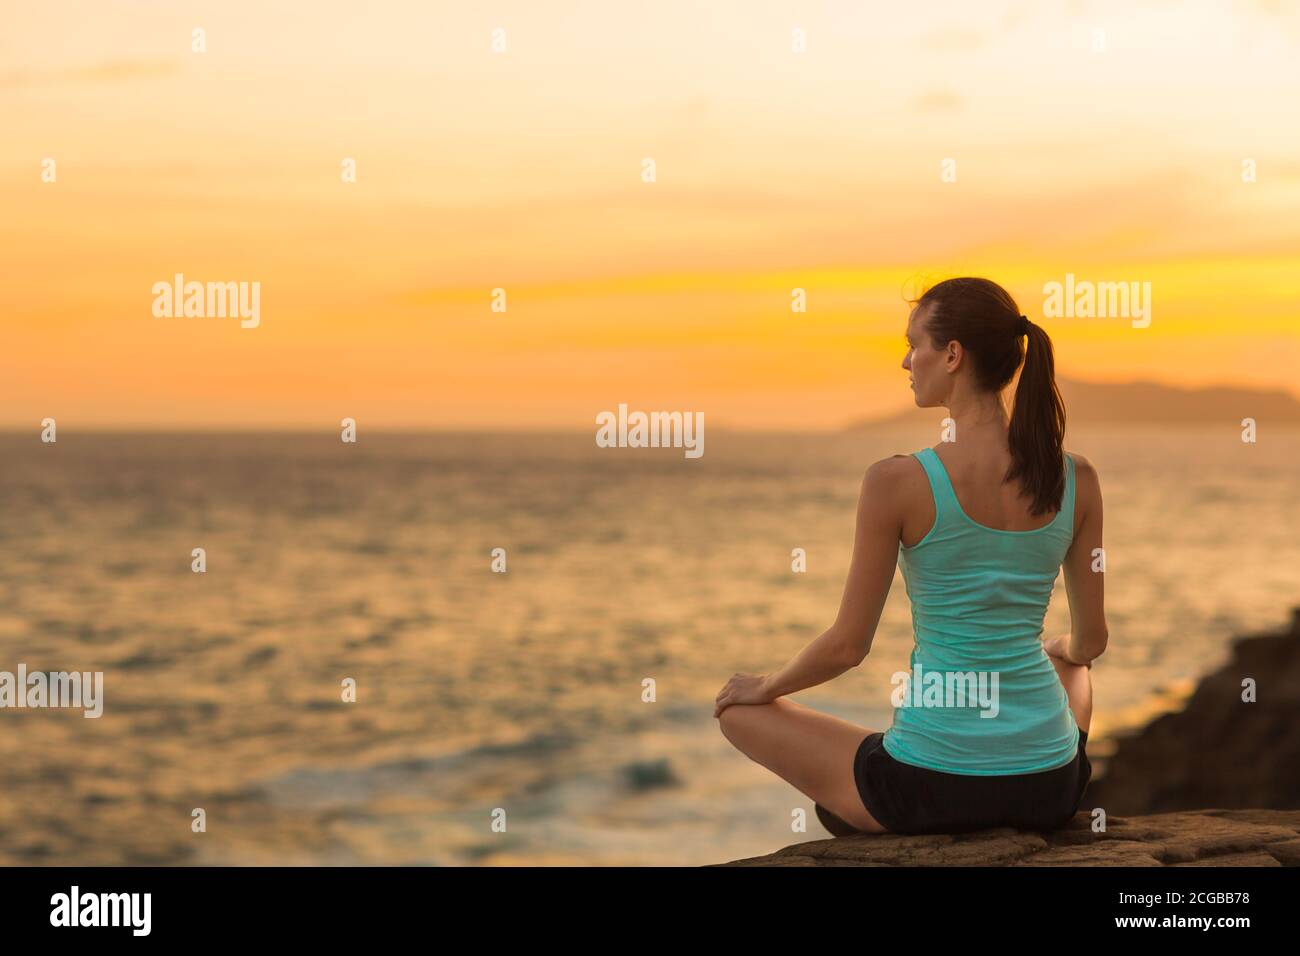 Fit relaxed woman meditating at peace on the beach with a beautiful view of the ocean during sunset. Health, yoga and harmony. Stock Photo